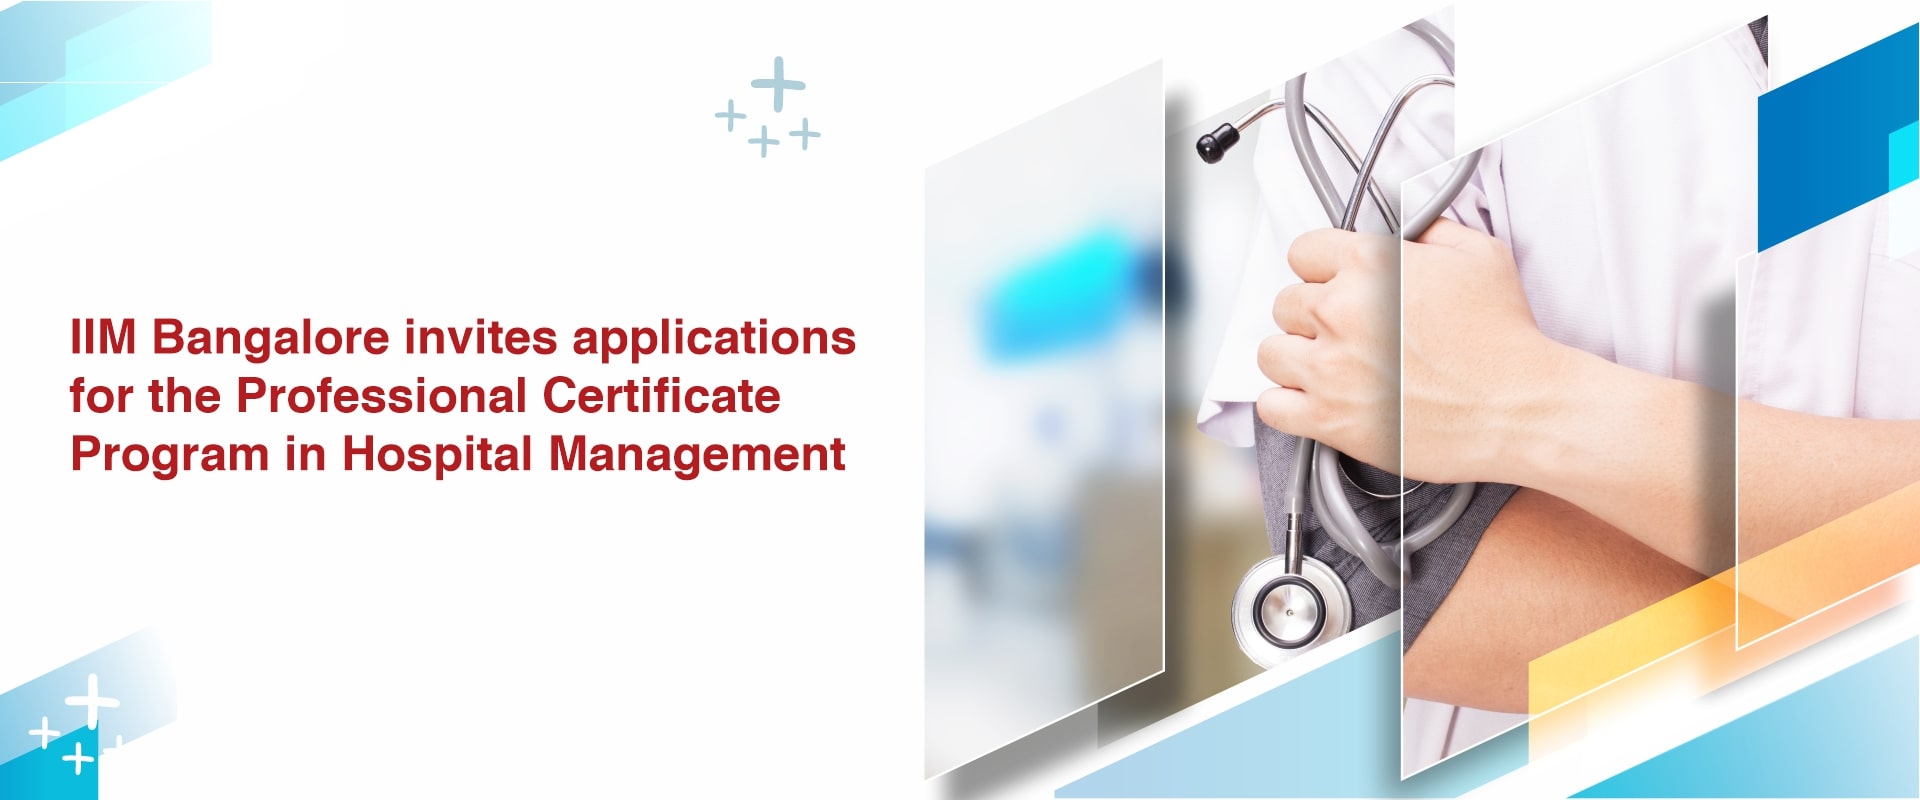 IIM Bangalore invites applications for the Professional Certificate Program in Hospital Management